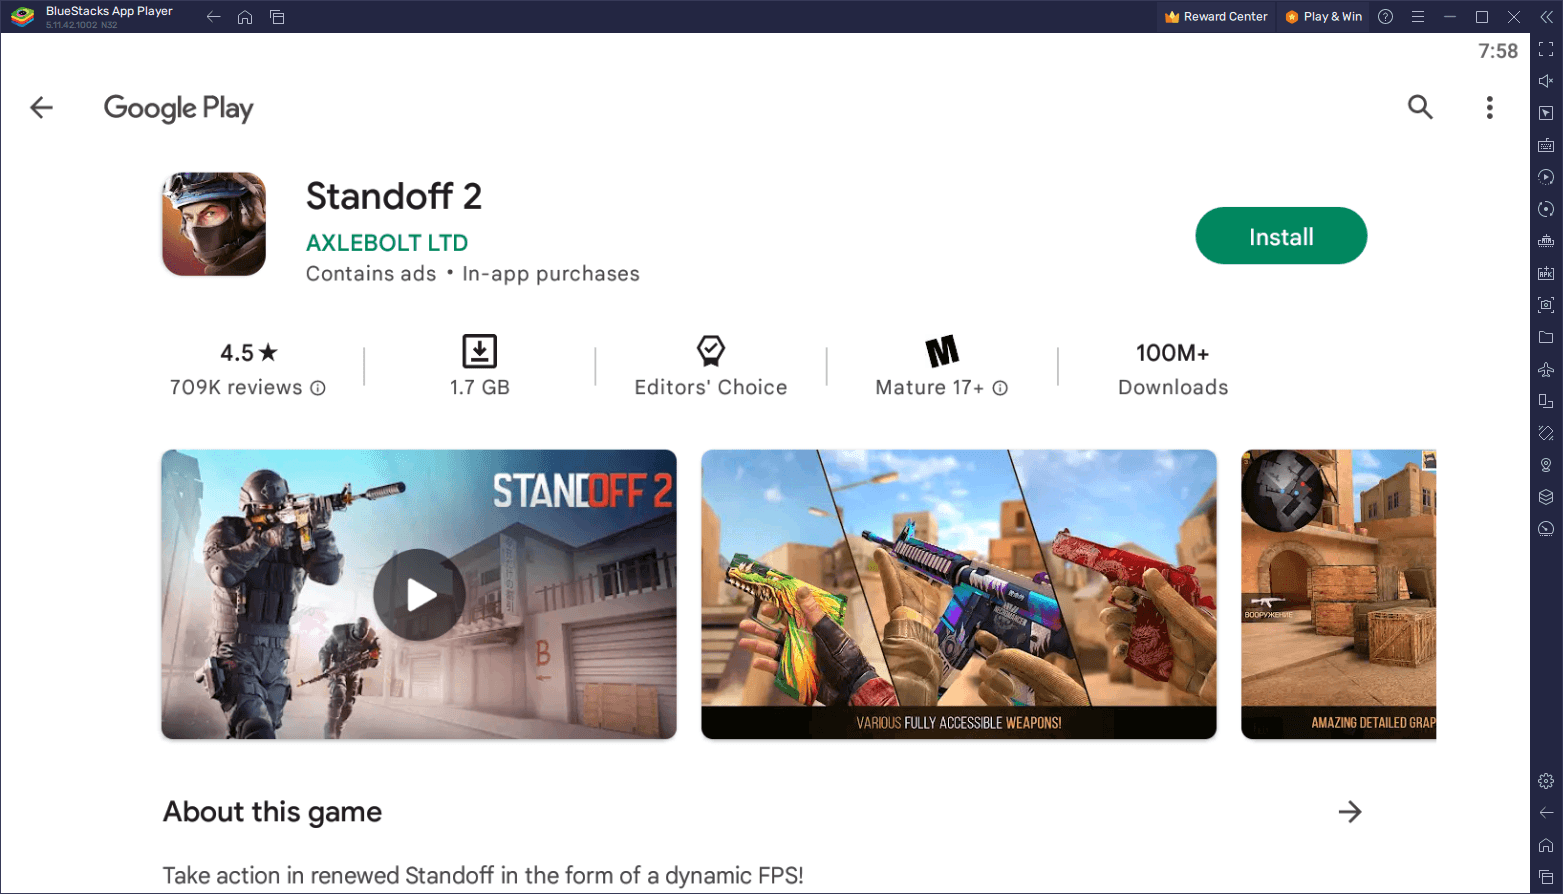 How to Play Standoff 2 on PC With BlueStacks